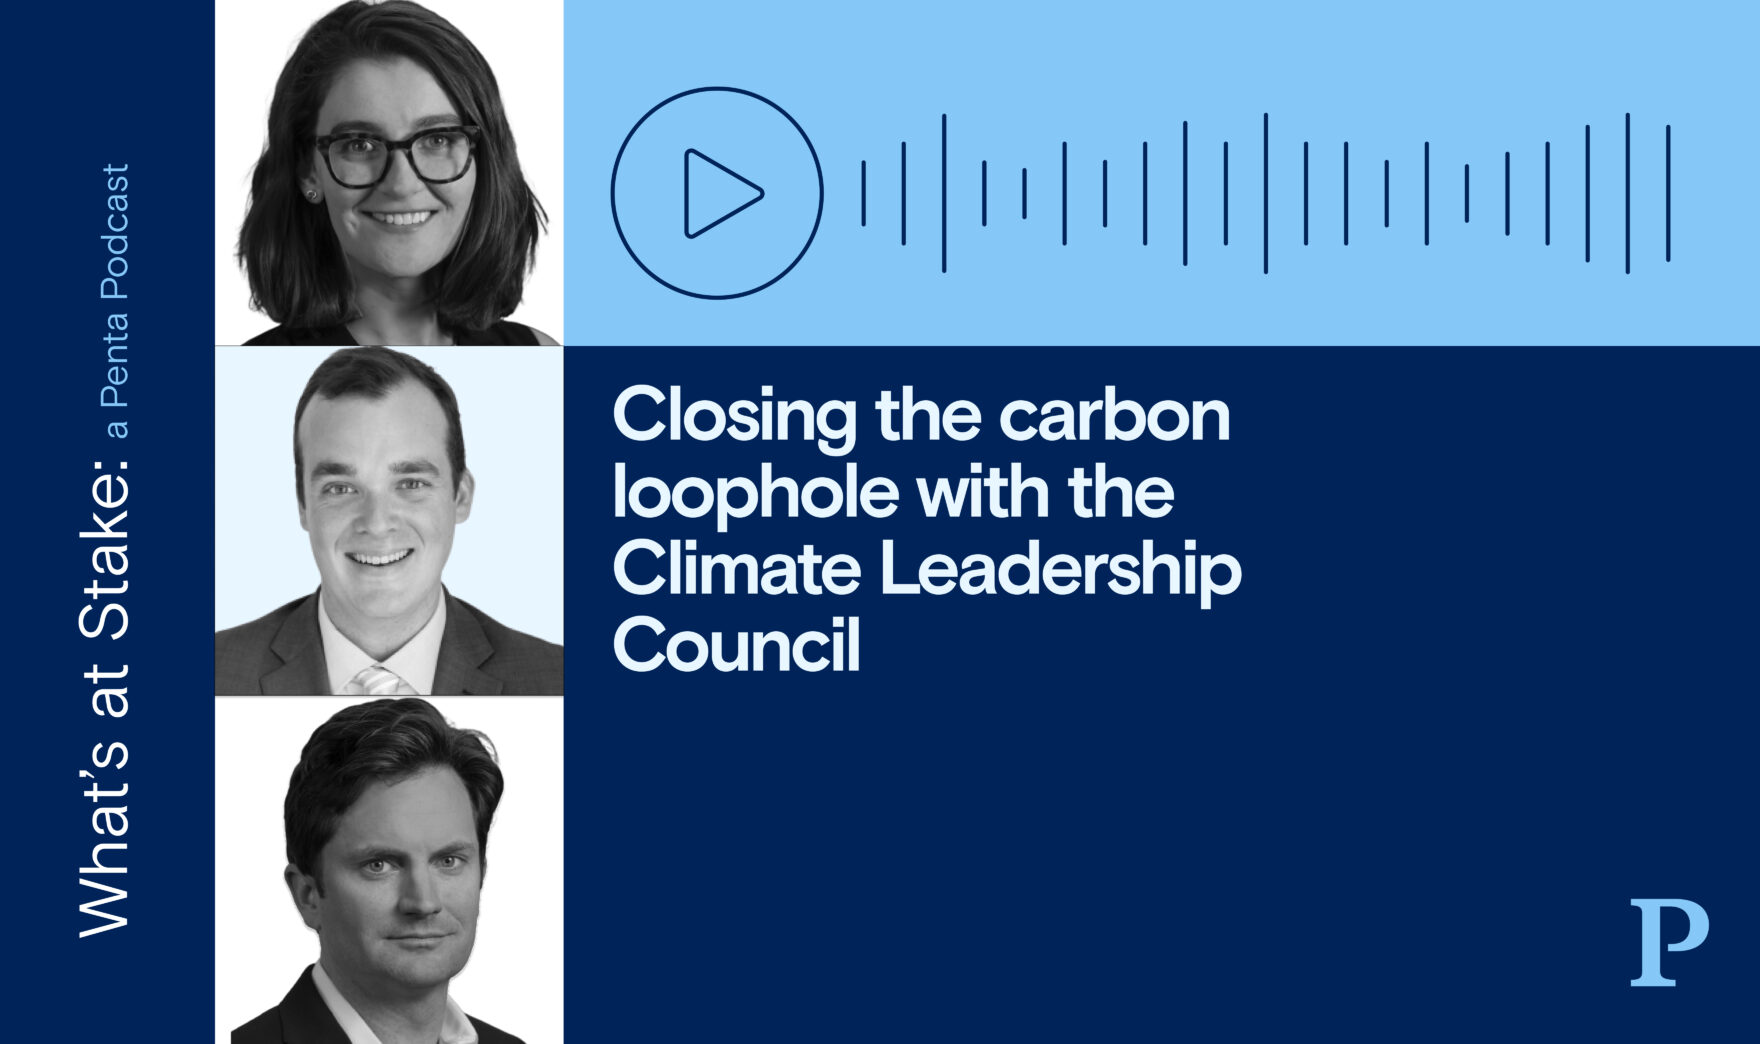 Closing the carbon loophole with the Climate Leadership Council